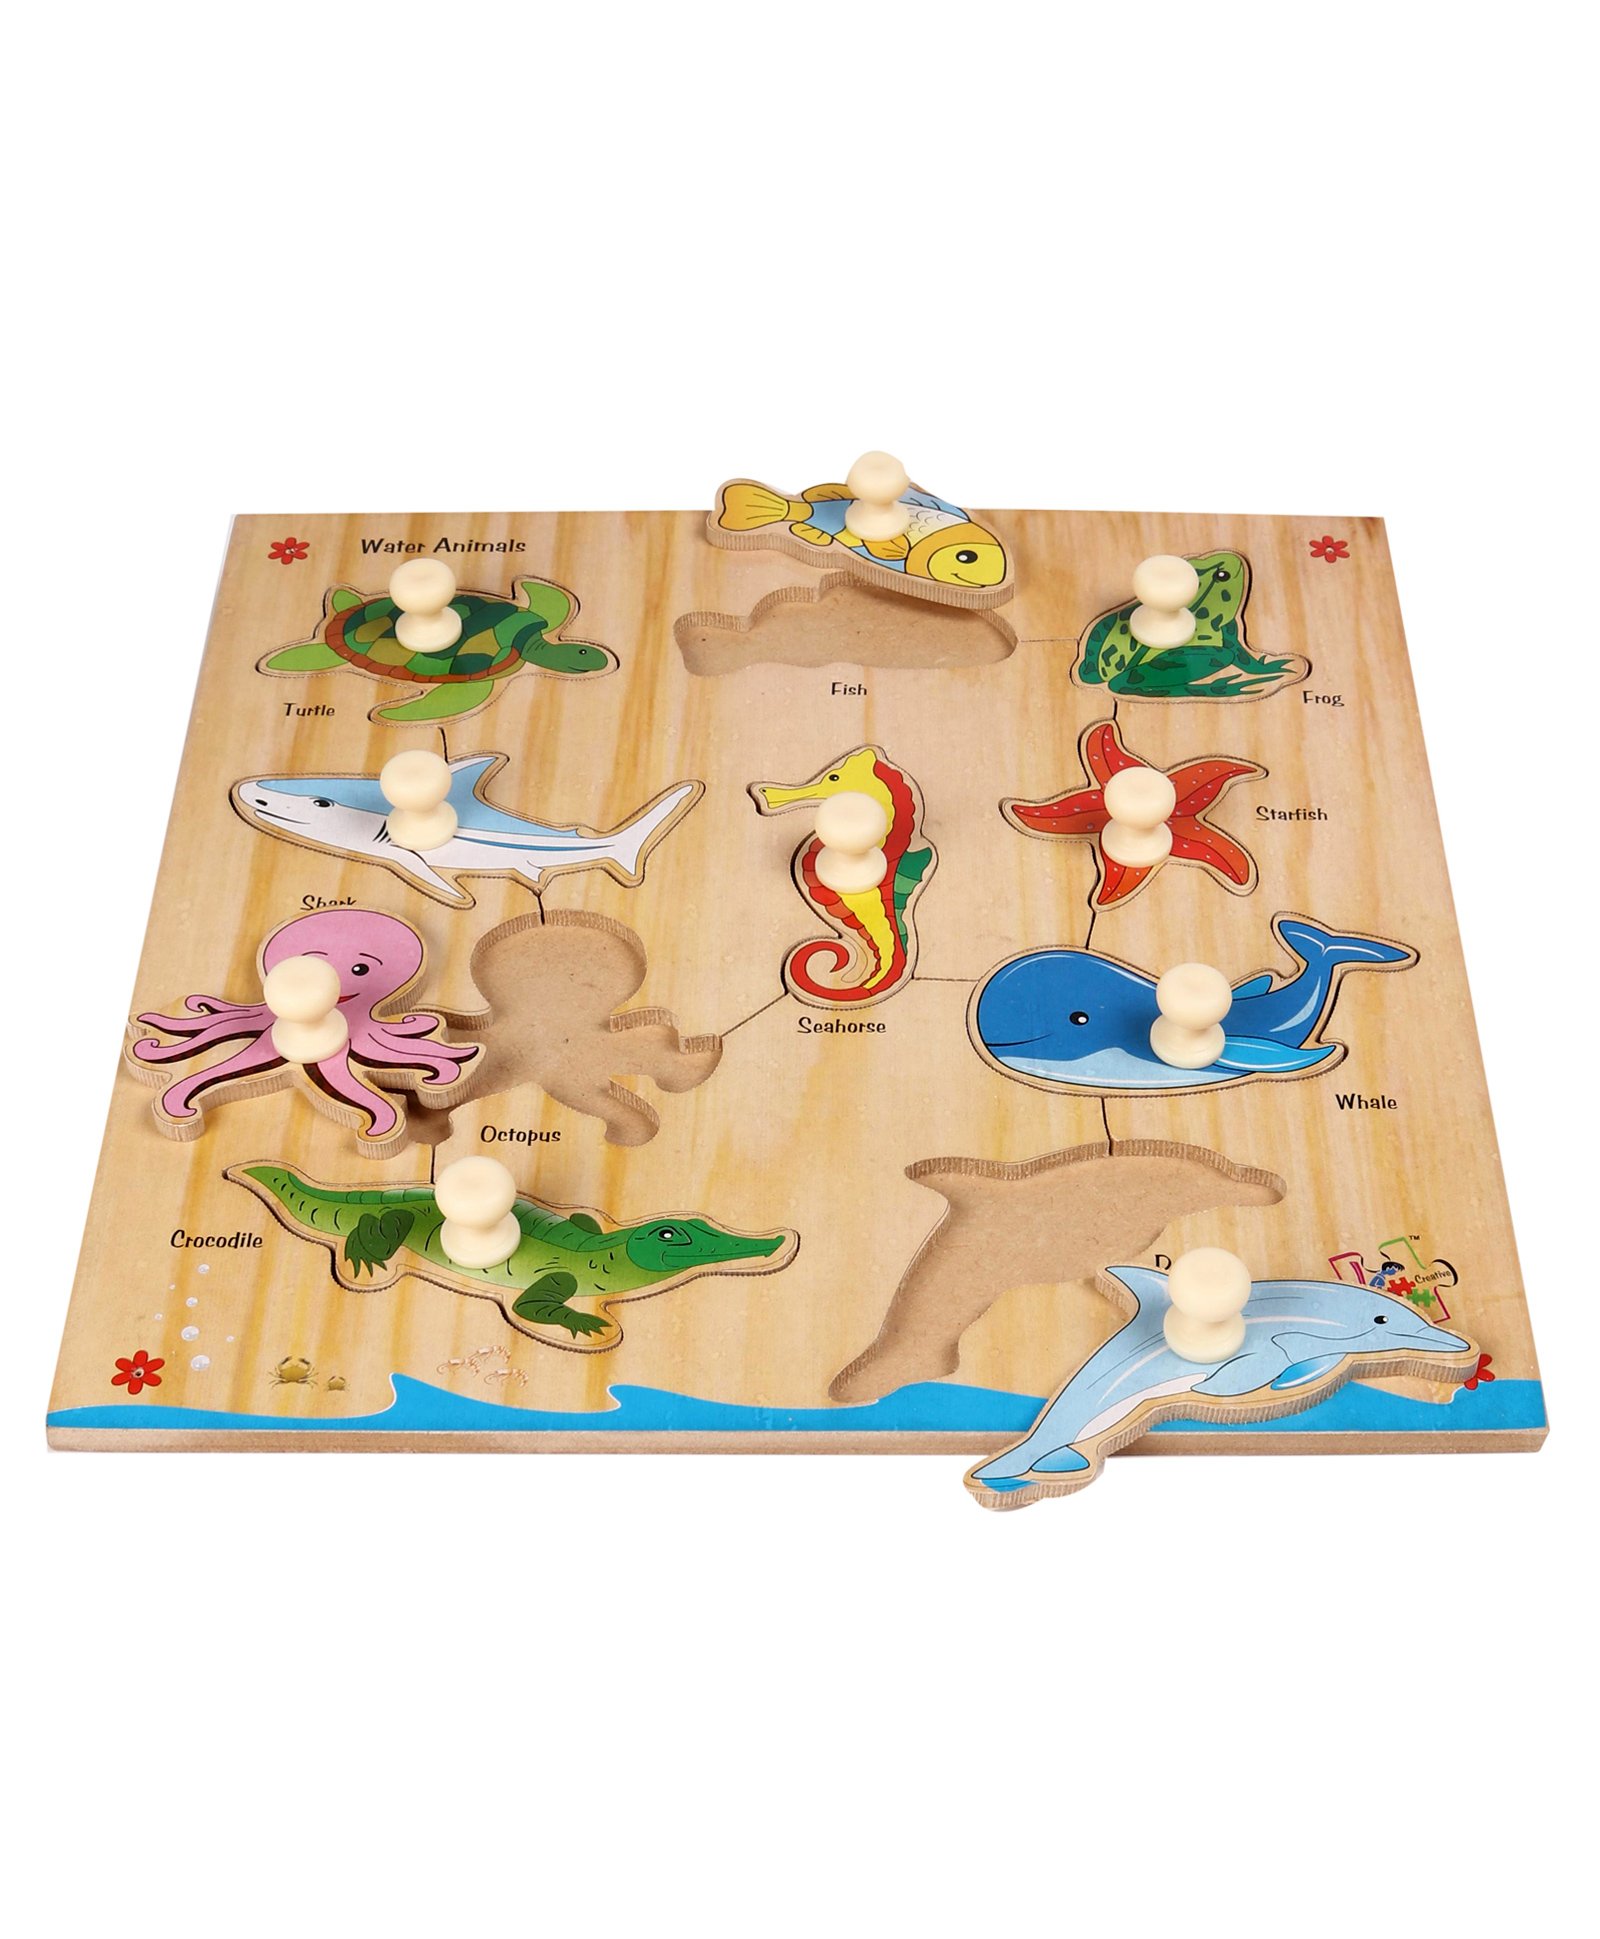 Kinder Creative Wooden 10 Water Animals With Knobs Puzzle - Multicolor  Online India, Buy Puzzle Games & Toys for (2-6 Years) at  -  2429147